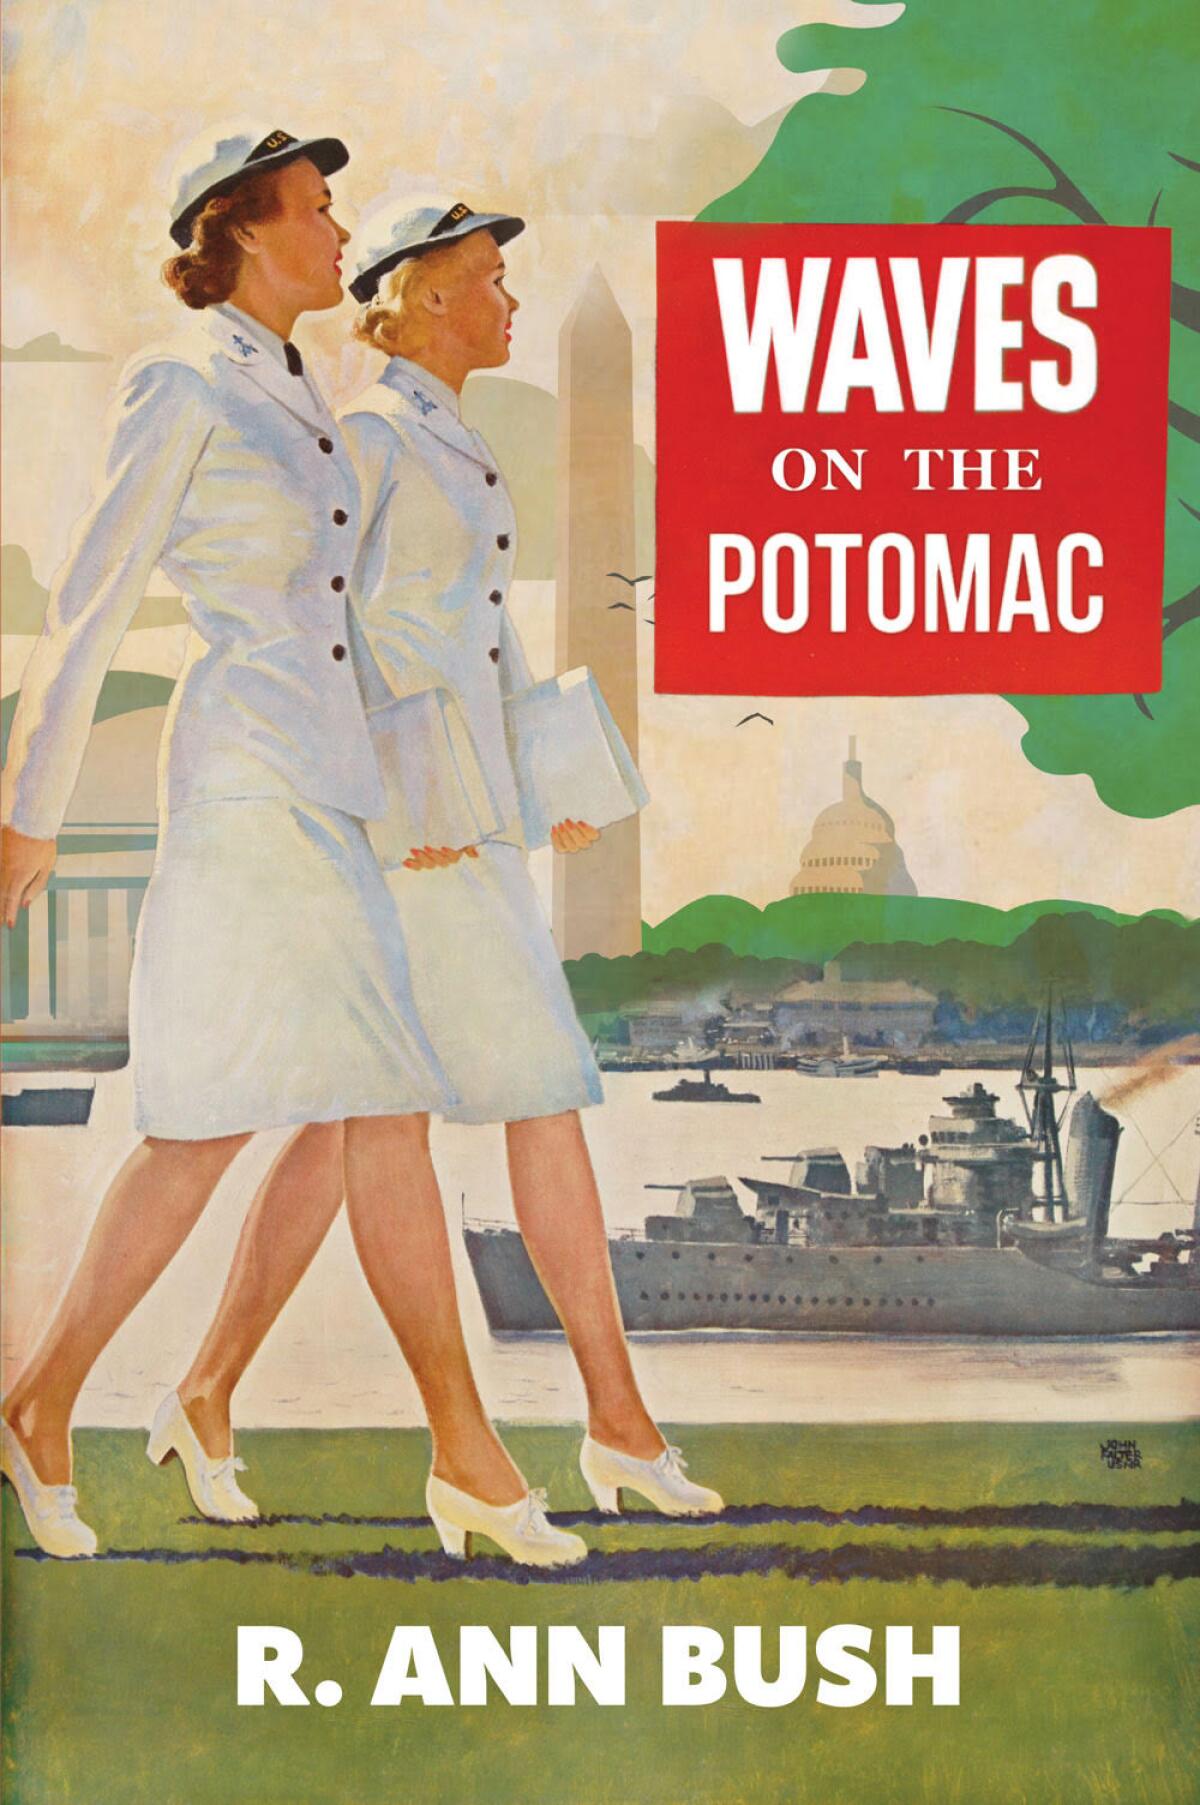 The main character of “WAVES on the Potomac” is based on author Ruth Ann Bush's great-aunt.